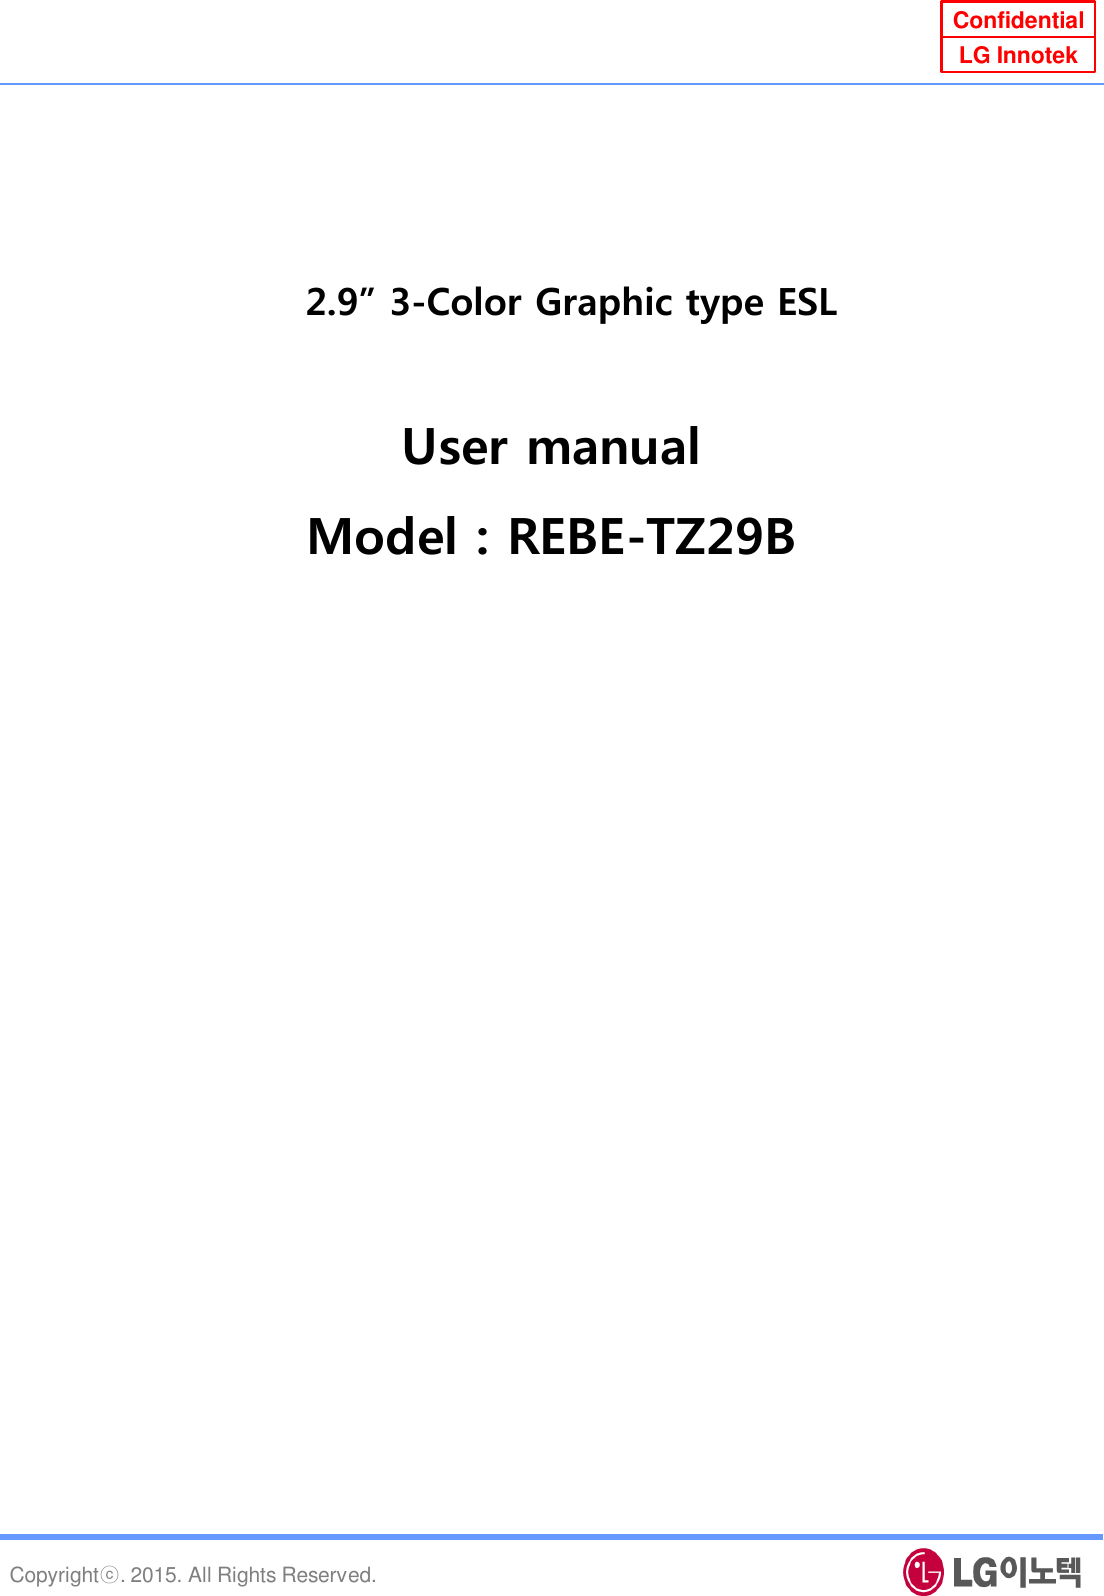 Copyrightⓒ. 2015. All Rights Reserved. Confidential LG Innotek 2.9” 3-Color Graphic type ESL User manual Model : REBE-TZ29B 